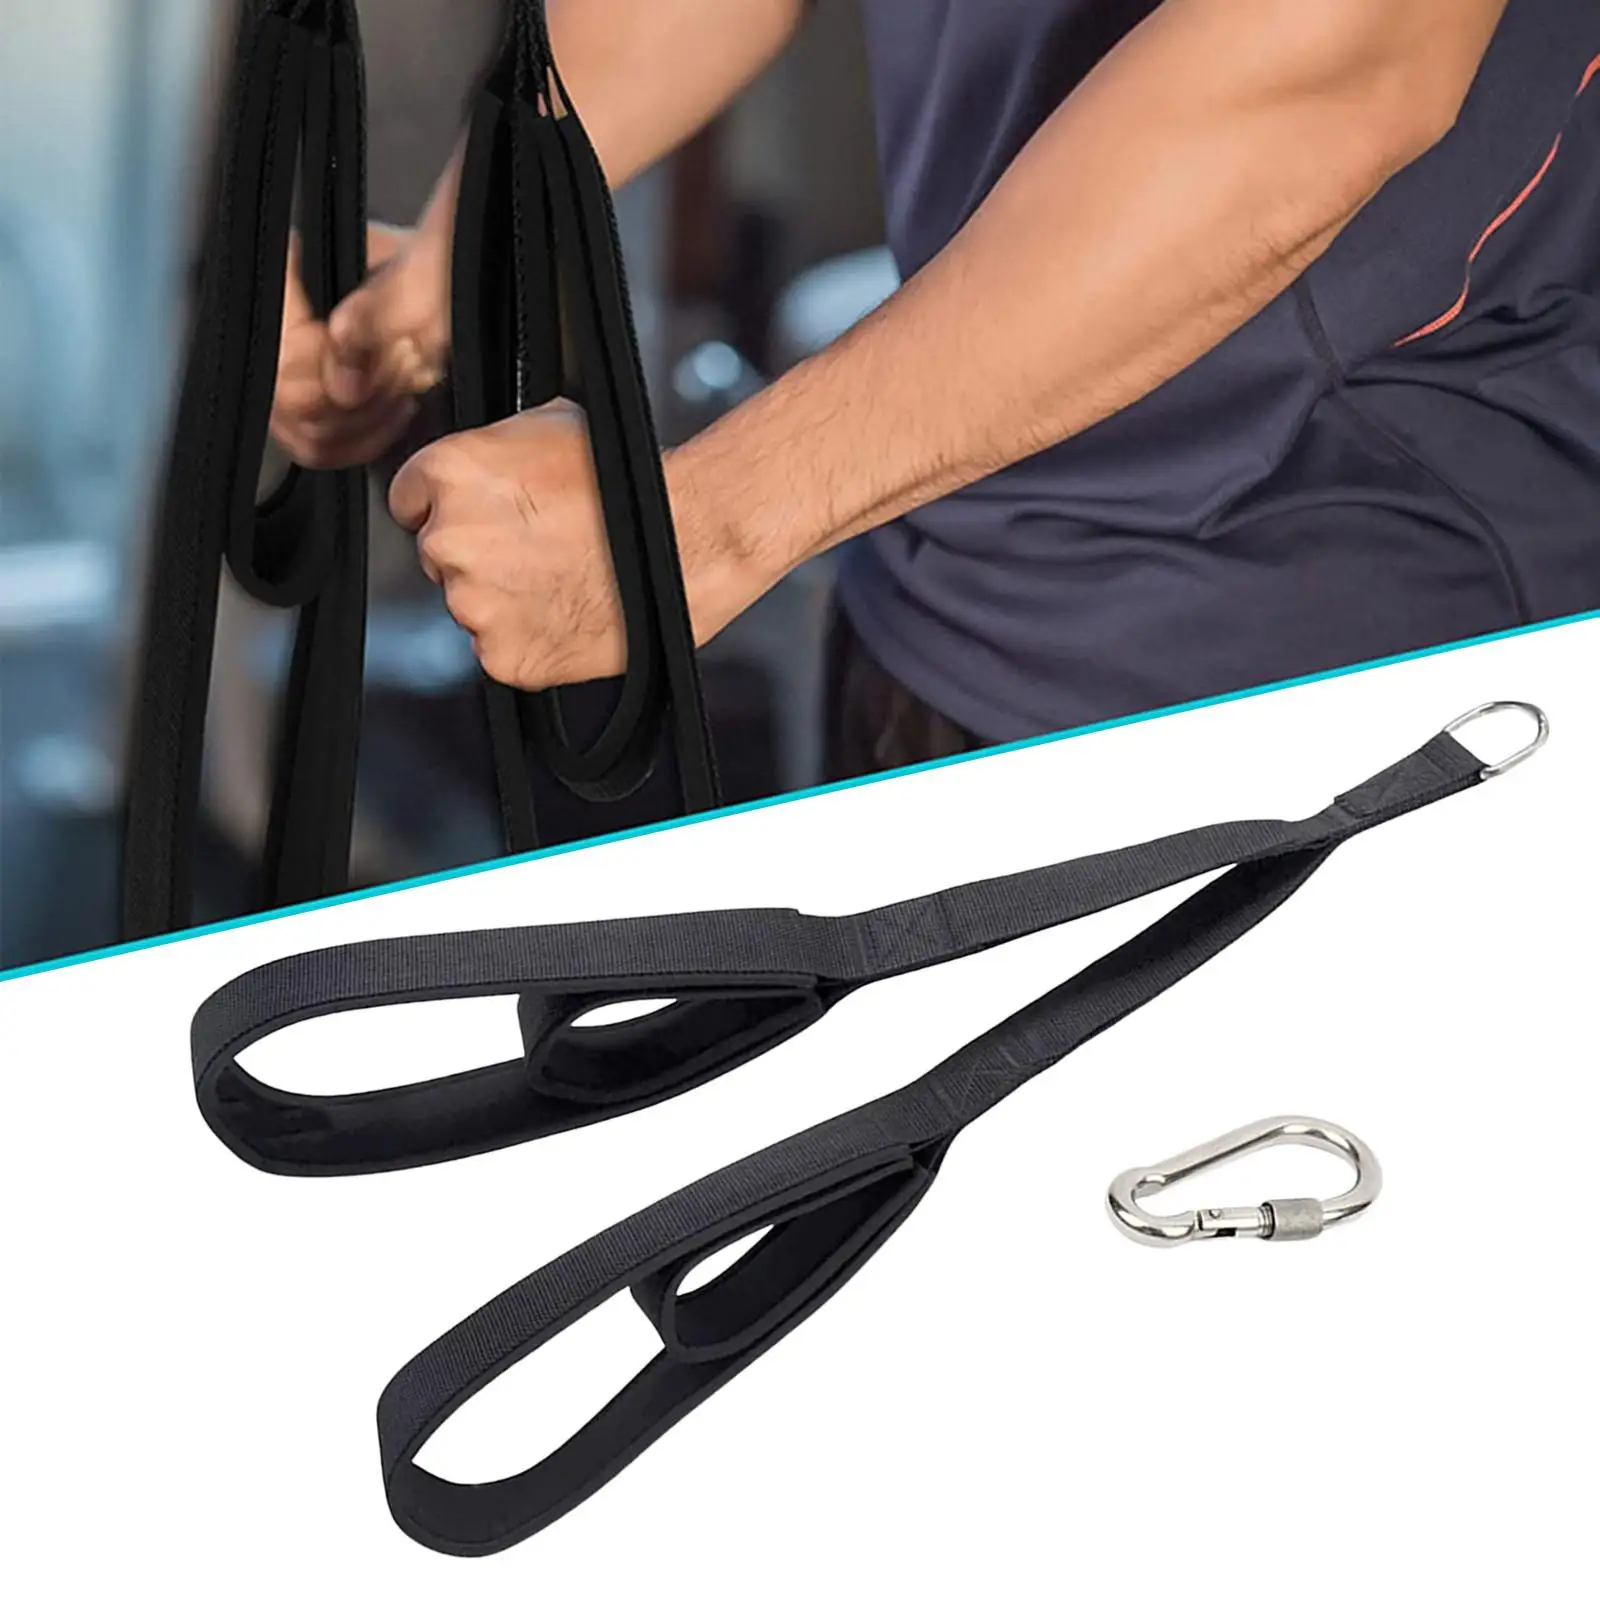 Ergonomic Tricep Bicep Strap Cable Machine Crunches for Push Downs Attachment